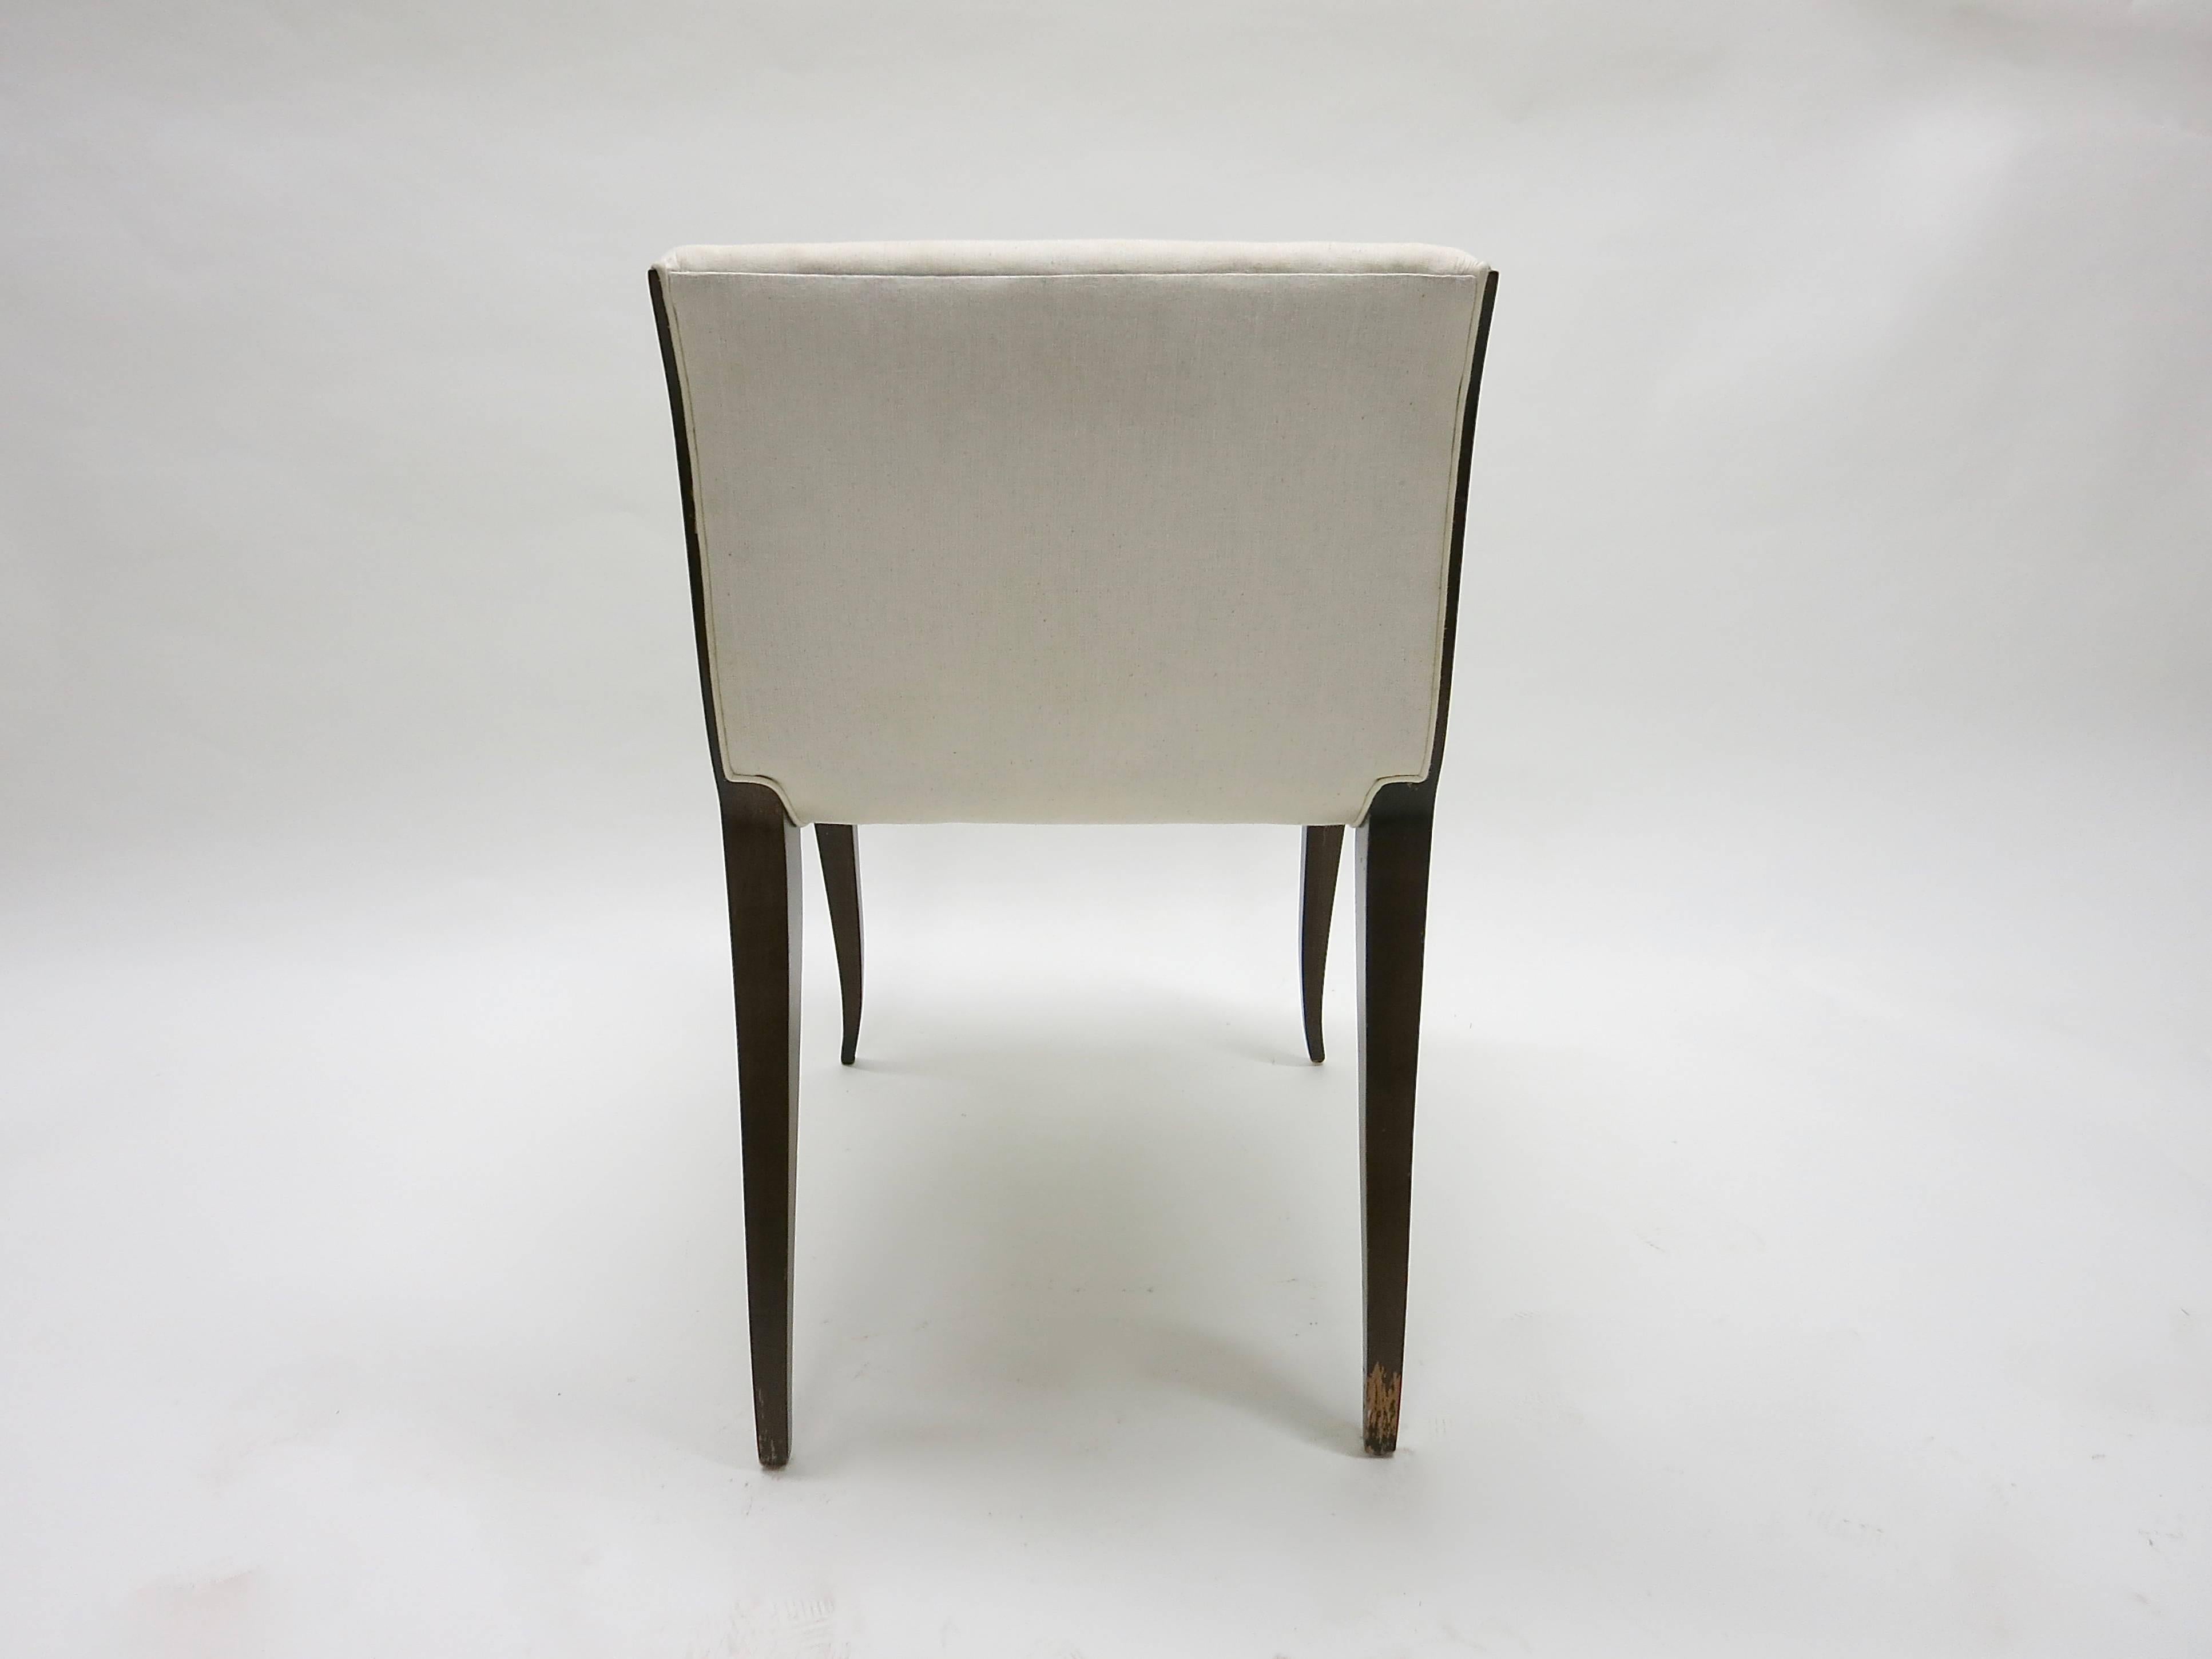 20th Century Vanity Stool Original Design by Émile-Jacques Ruhlmann in 1927, France